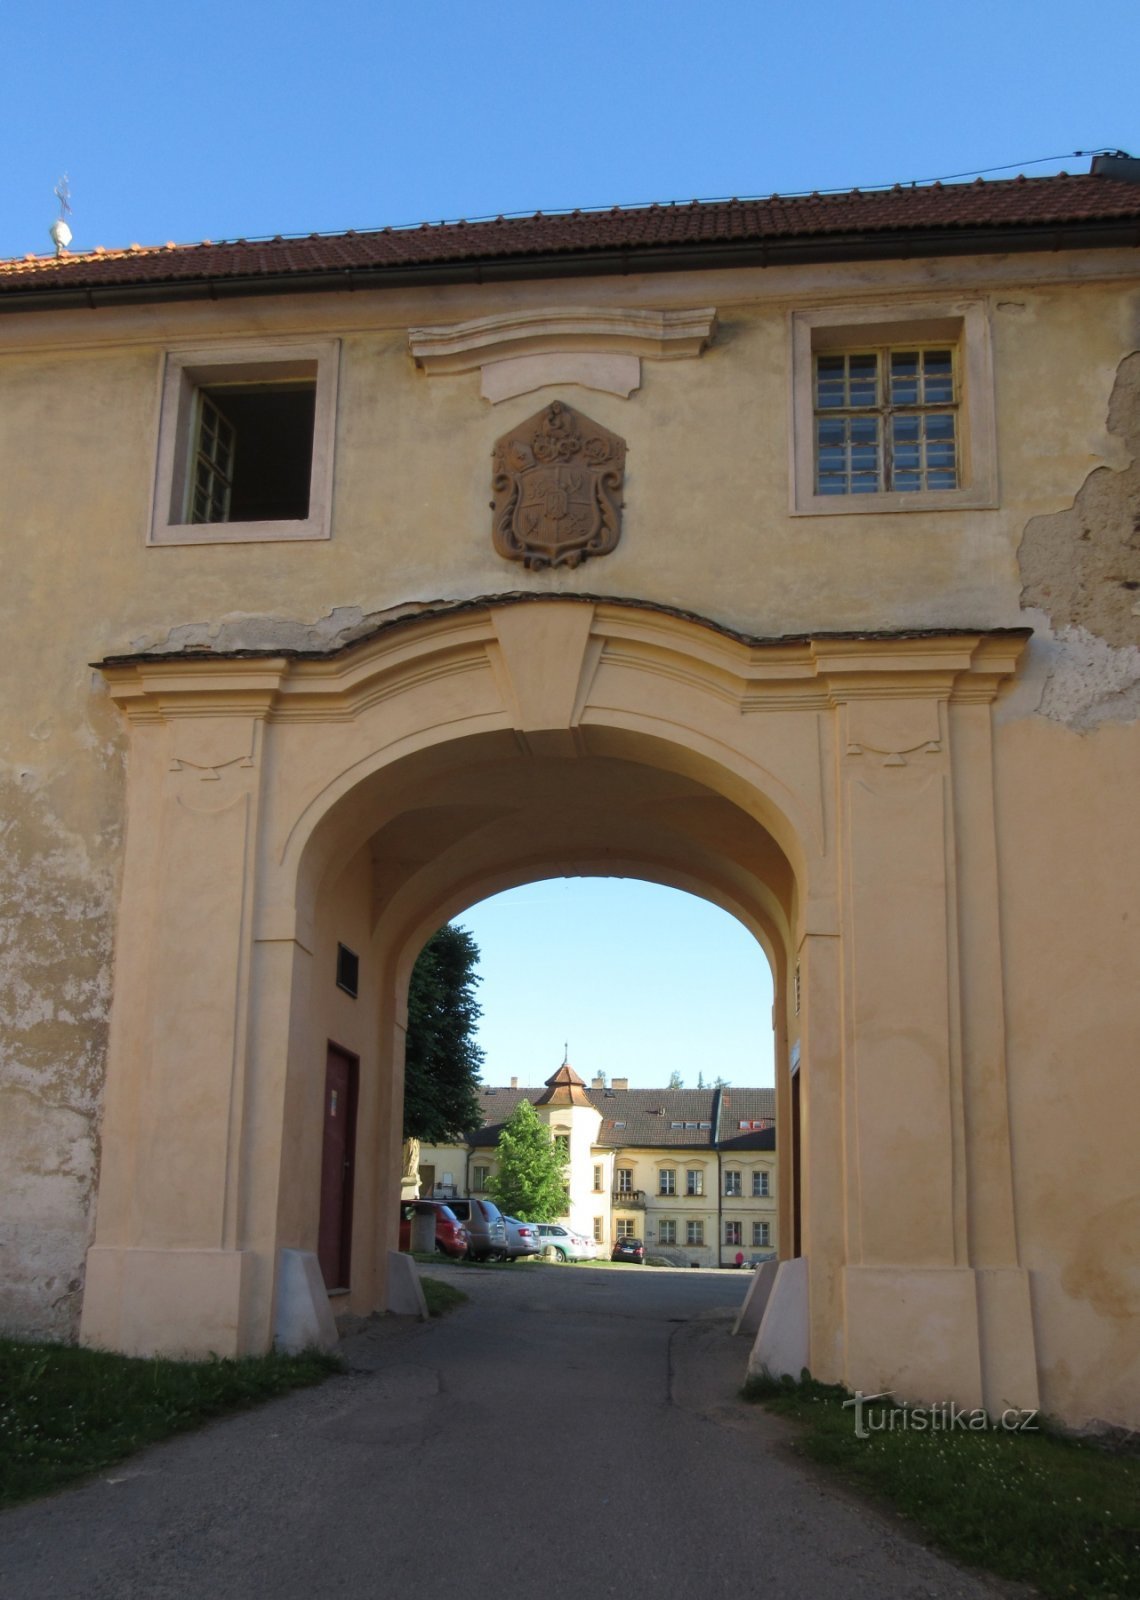 Entrance to the monastery complex